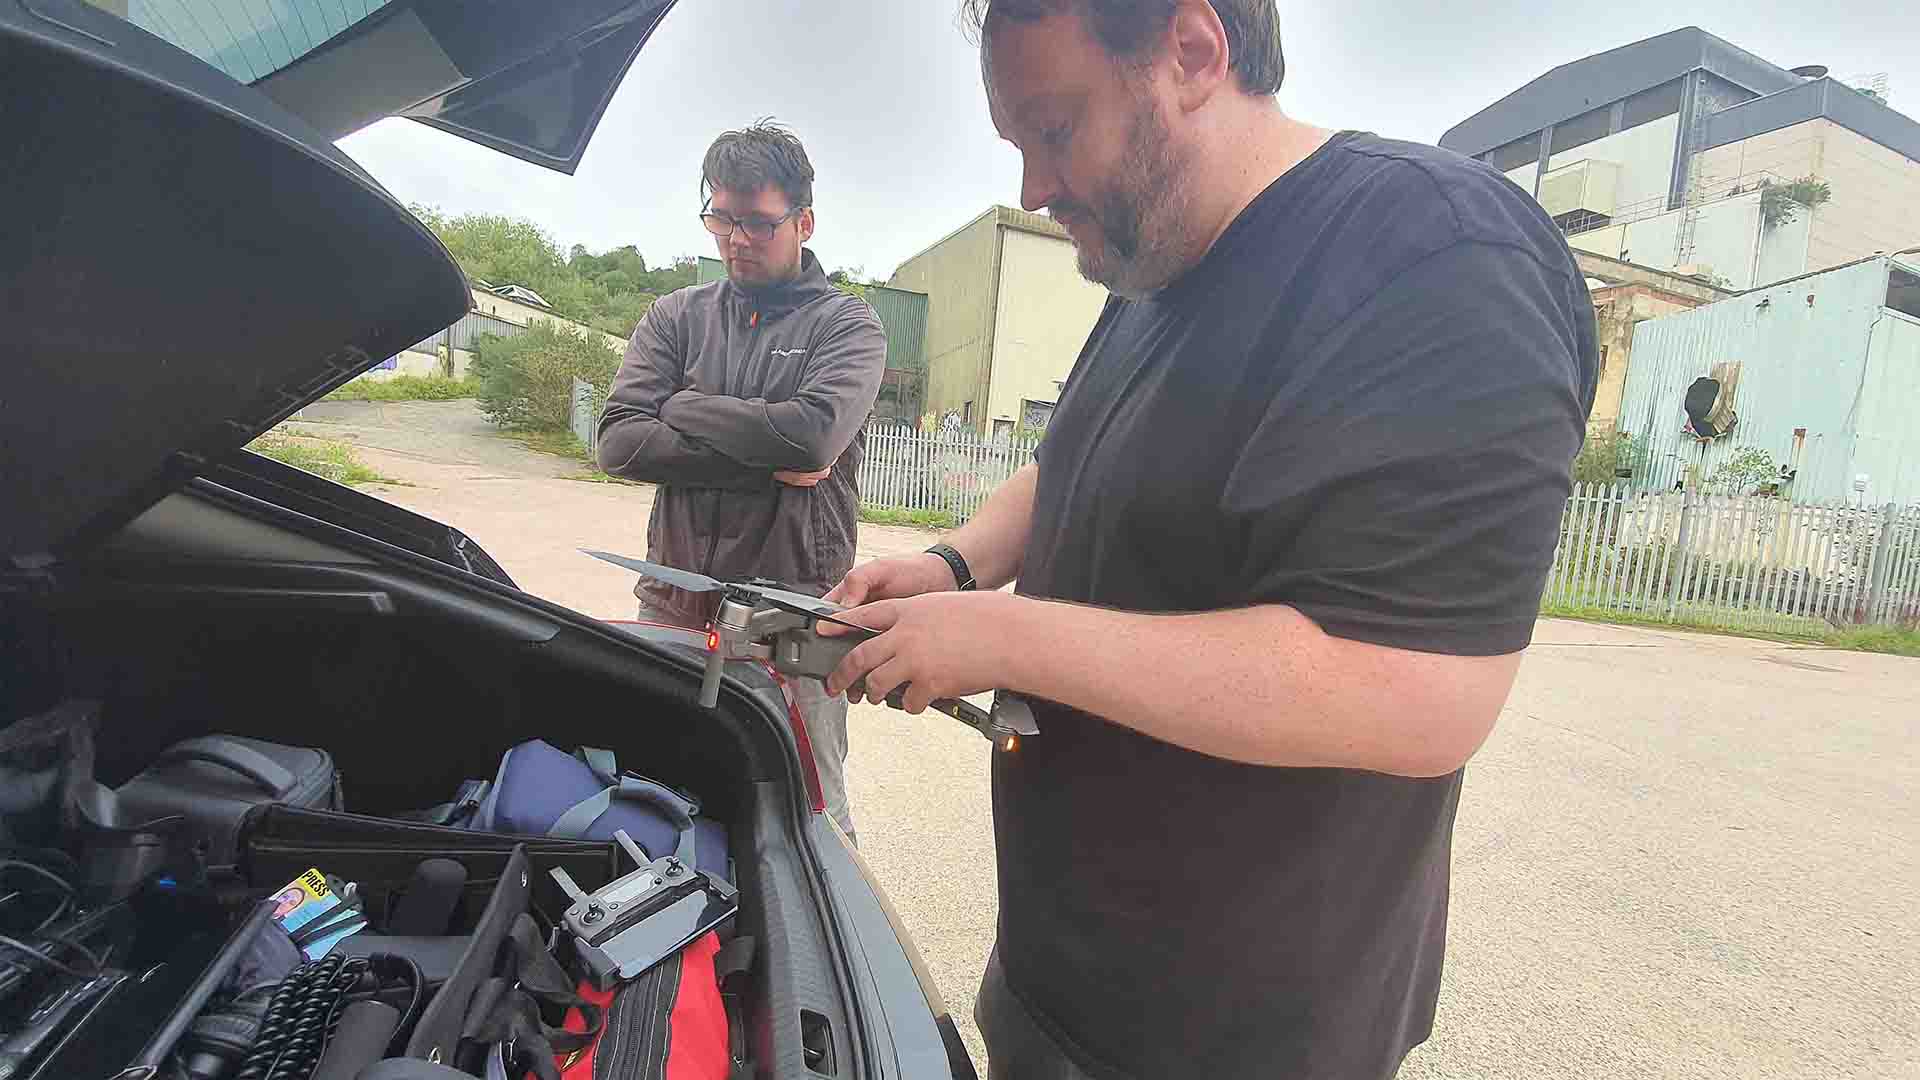 Michael Collins and David Collins preparing to fly a drone for test footage.